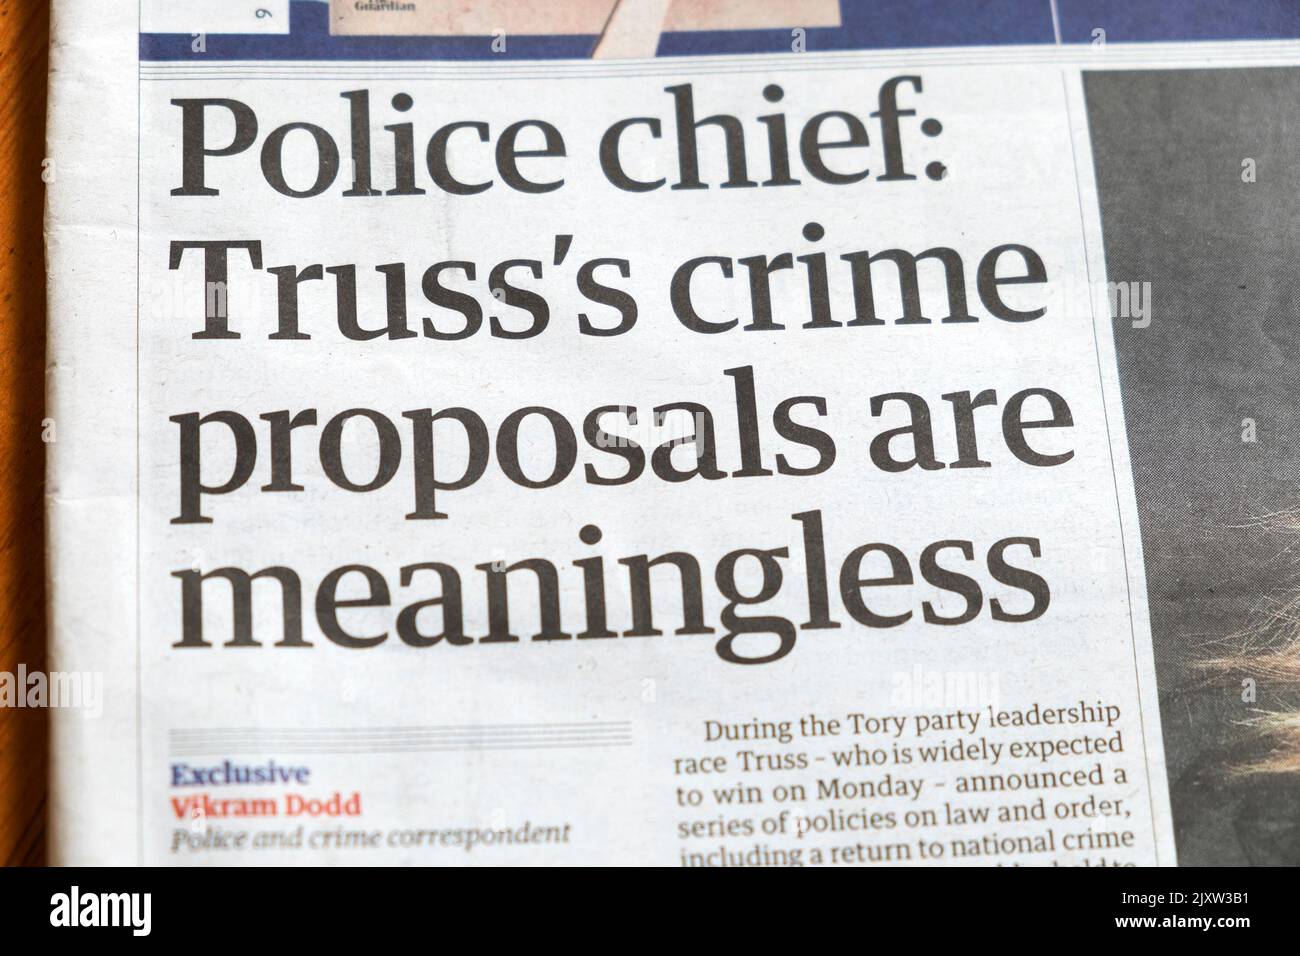 'Police chief: Truss's crime proposals are meaningless' Guardian Liz Truss newspaper headline 3 September 2022 London England UK Great Britain Stock Photo